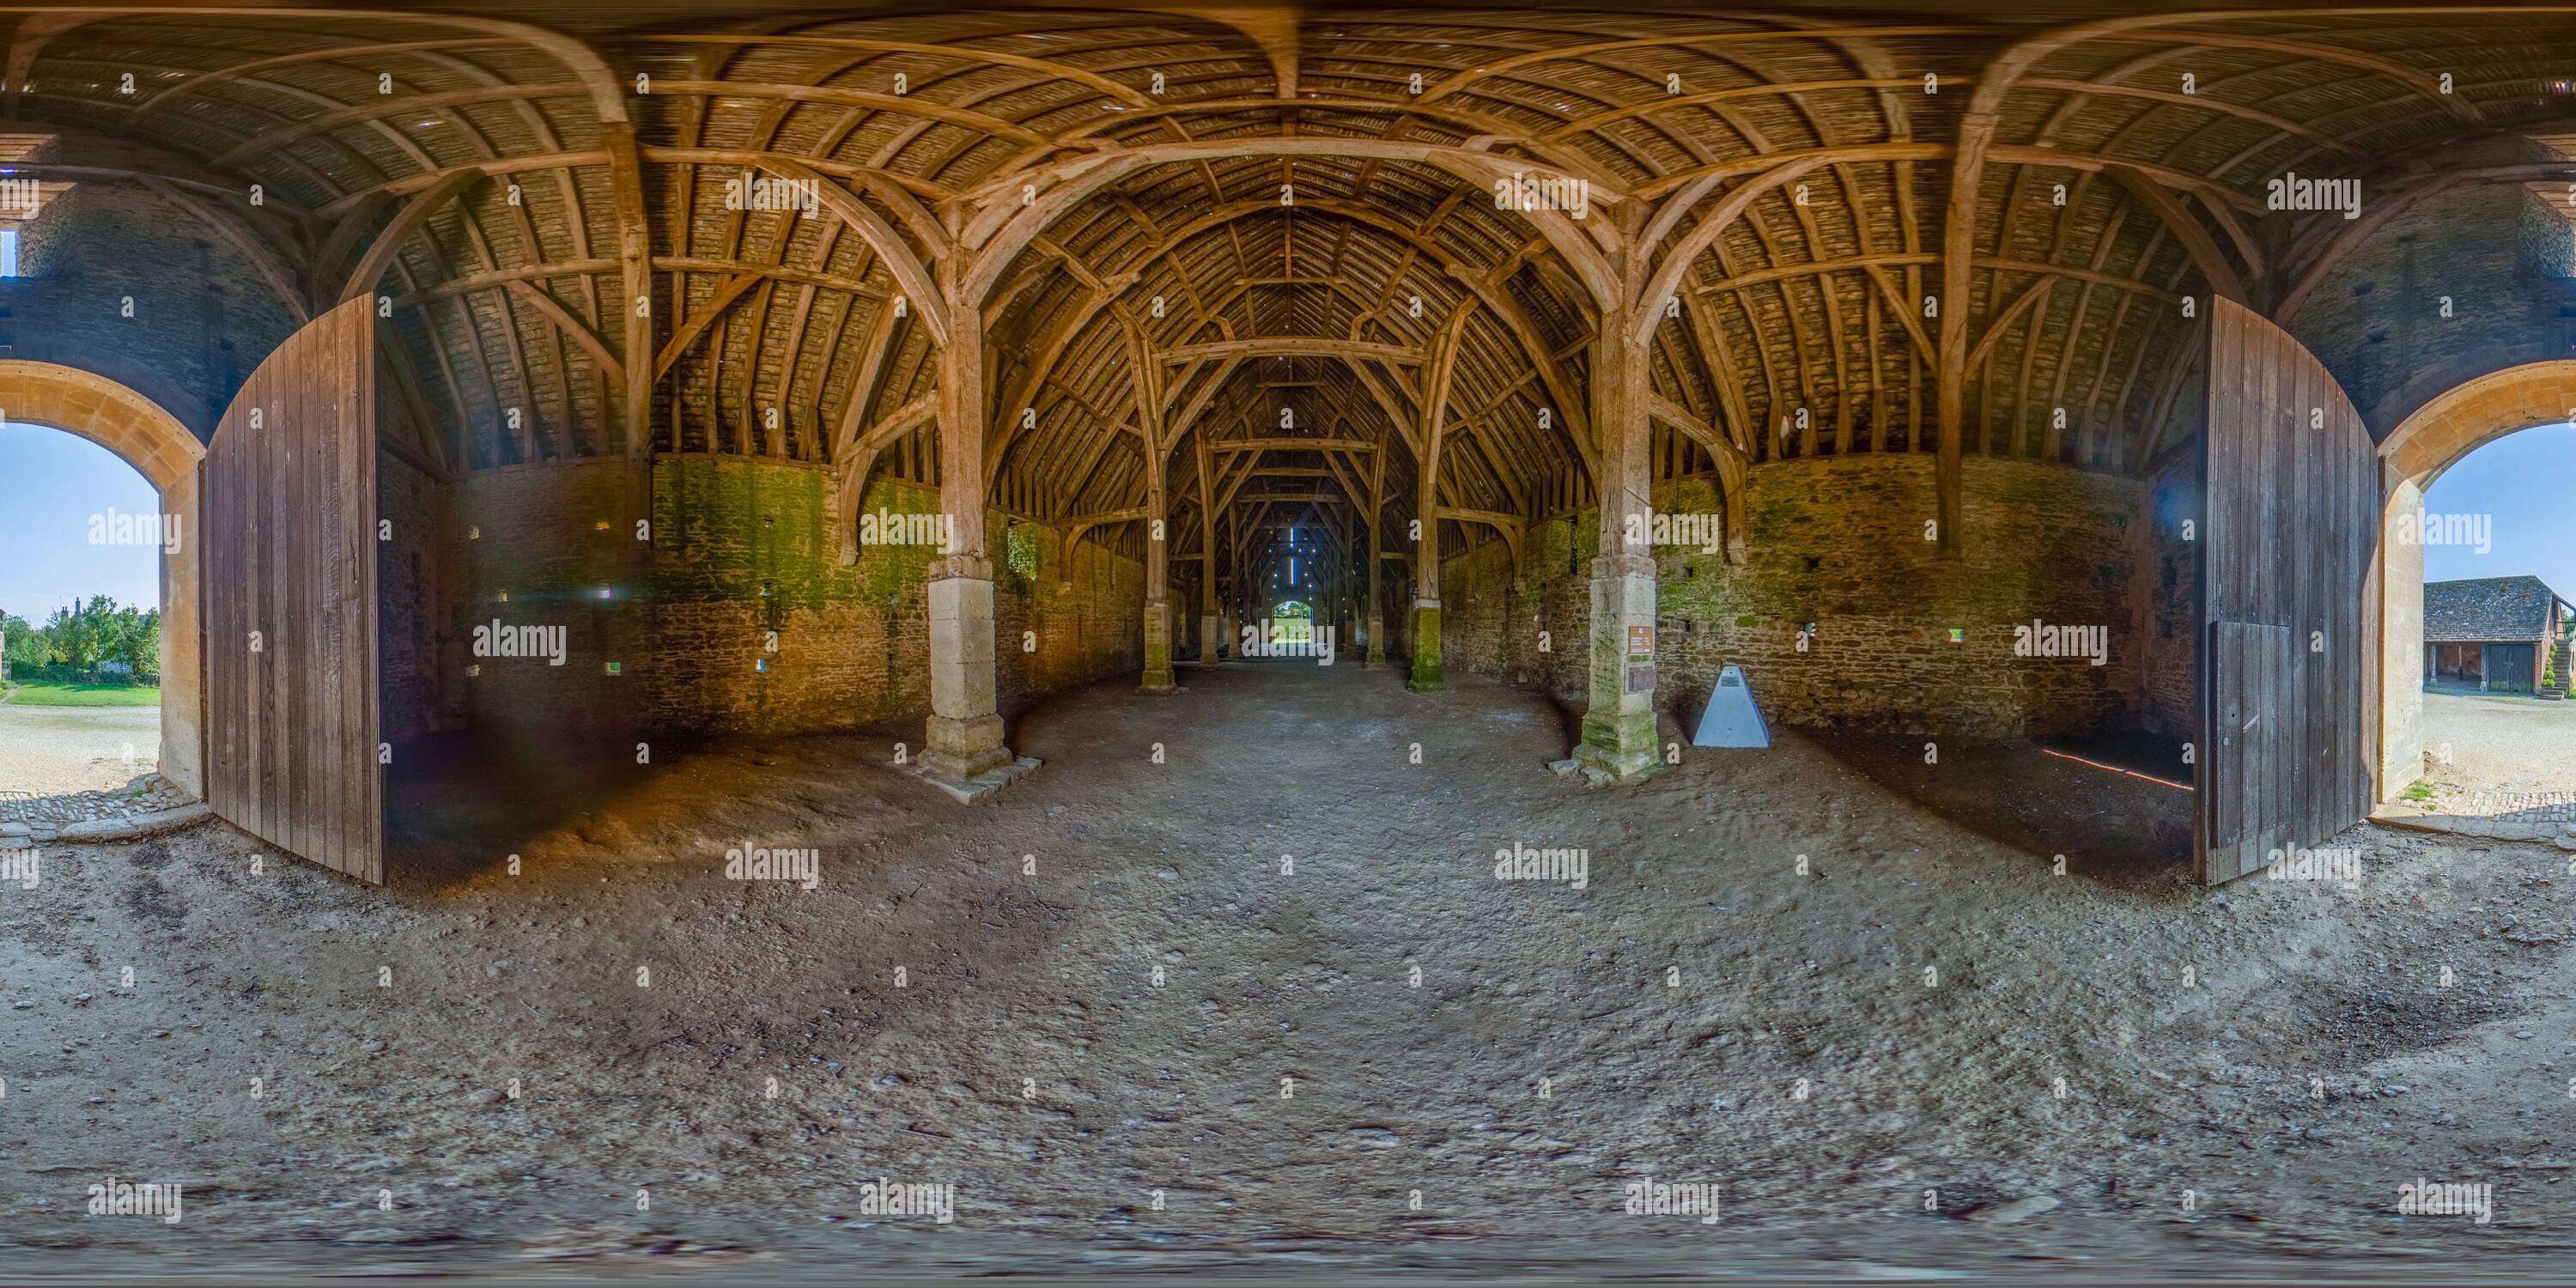 360 degree panoramic view of Interior of Great Coxwell Tithe Barn at front entrance